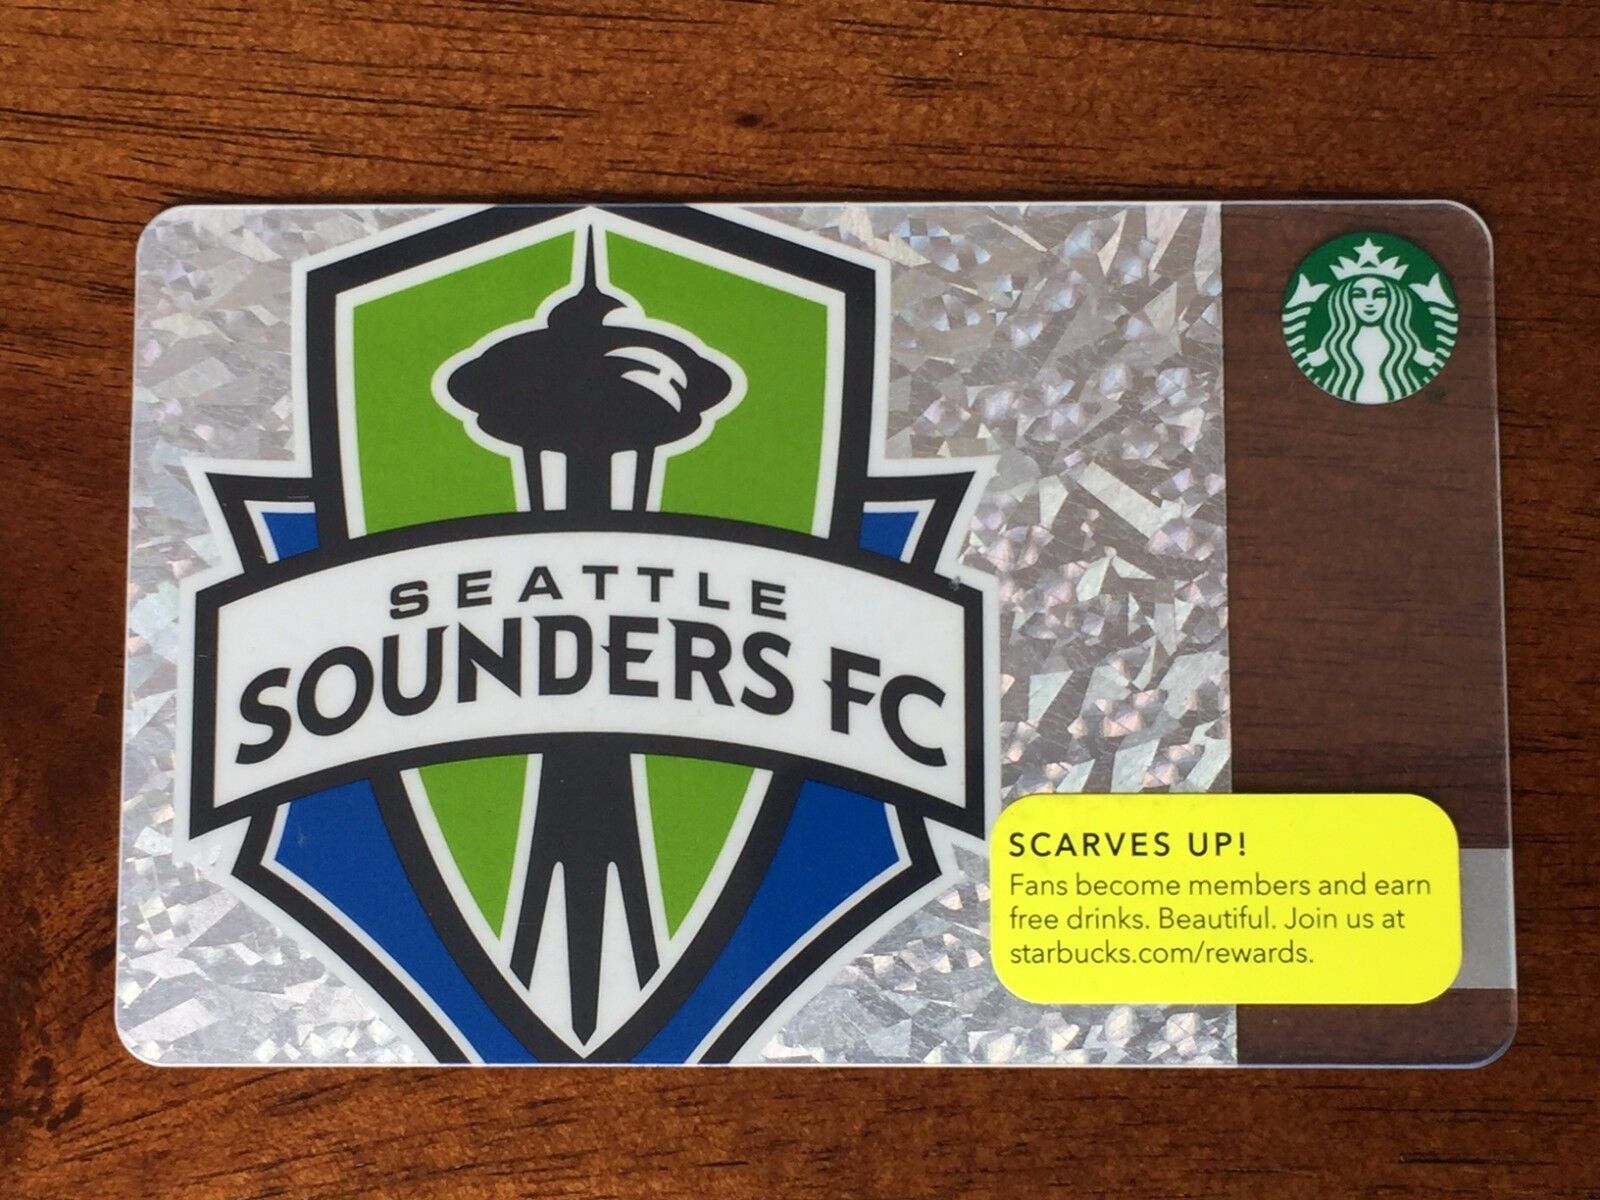 Starbucks SEATTLE SOUNDERS 2013 FC Soccer Gift Card Limited Edition - New Mint Без бренда